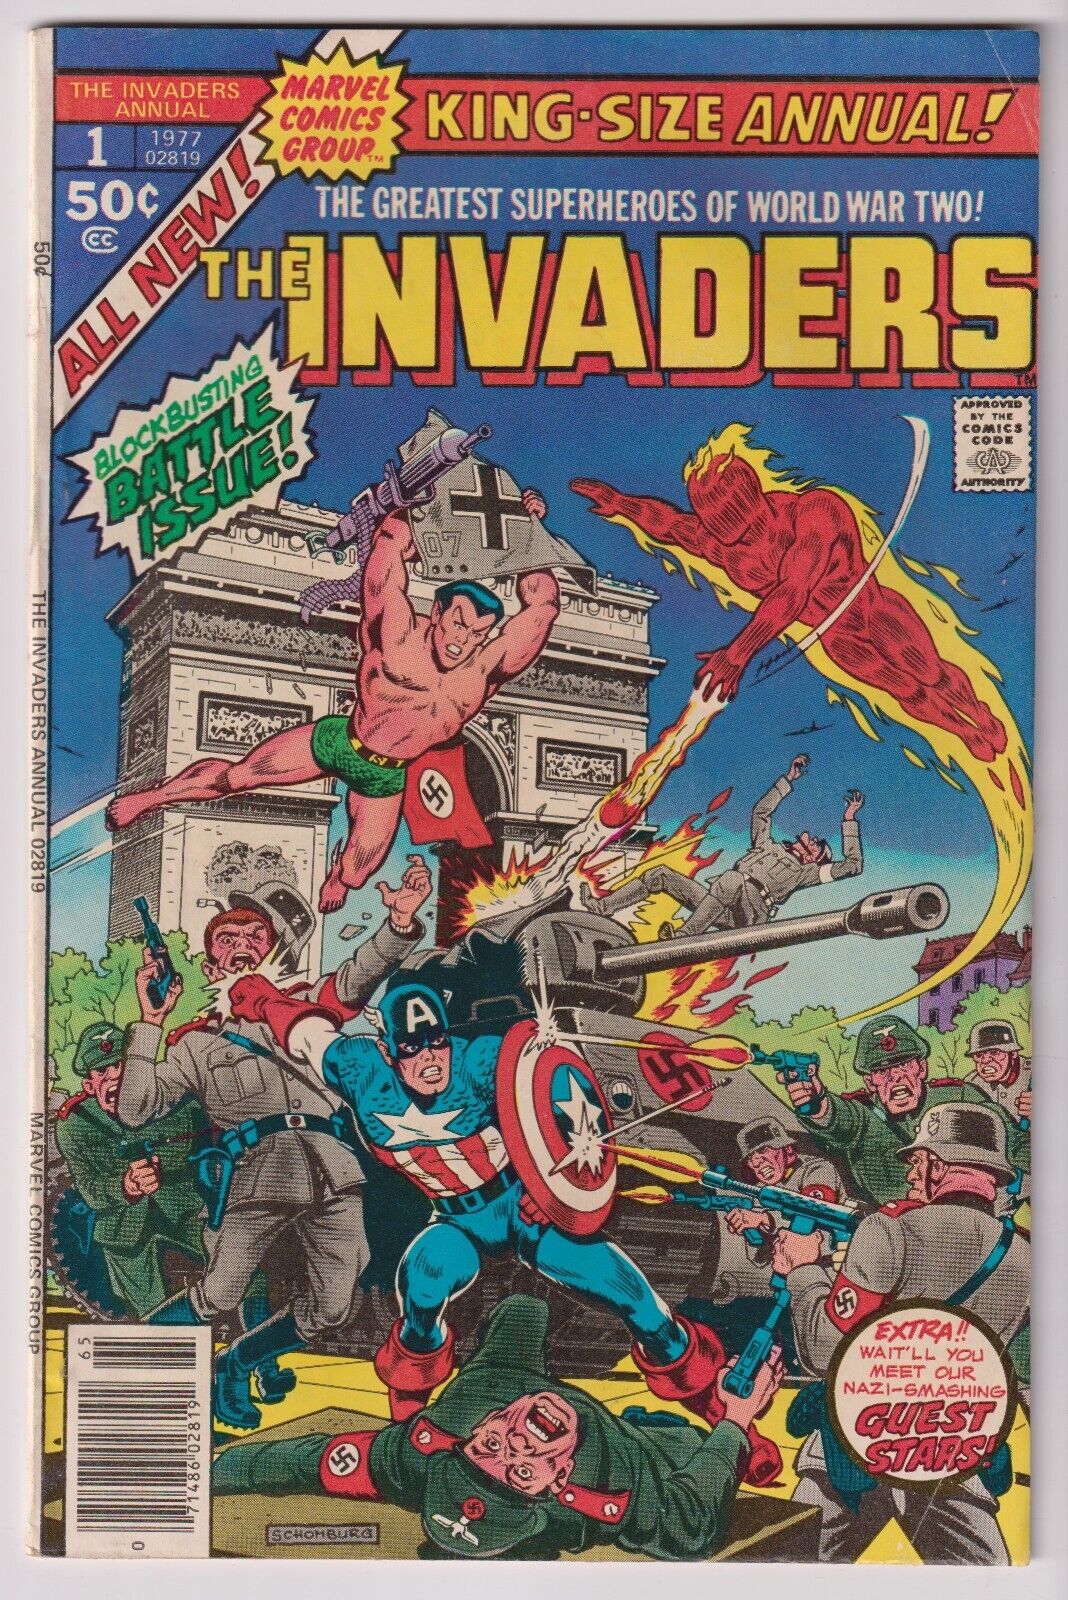 1977 MARVEL COMICS THE INVADERS ANNUAL #1 IN FN+ CONDITION